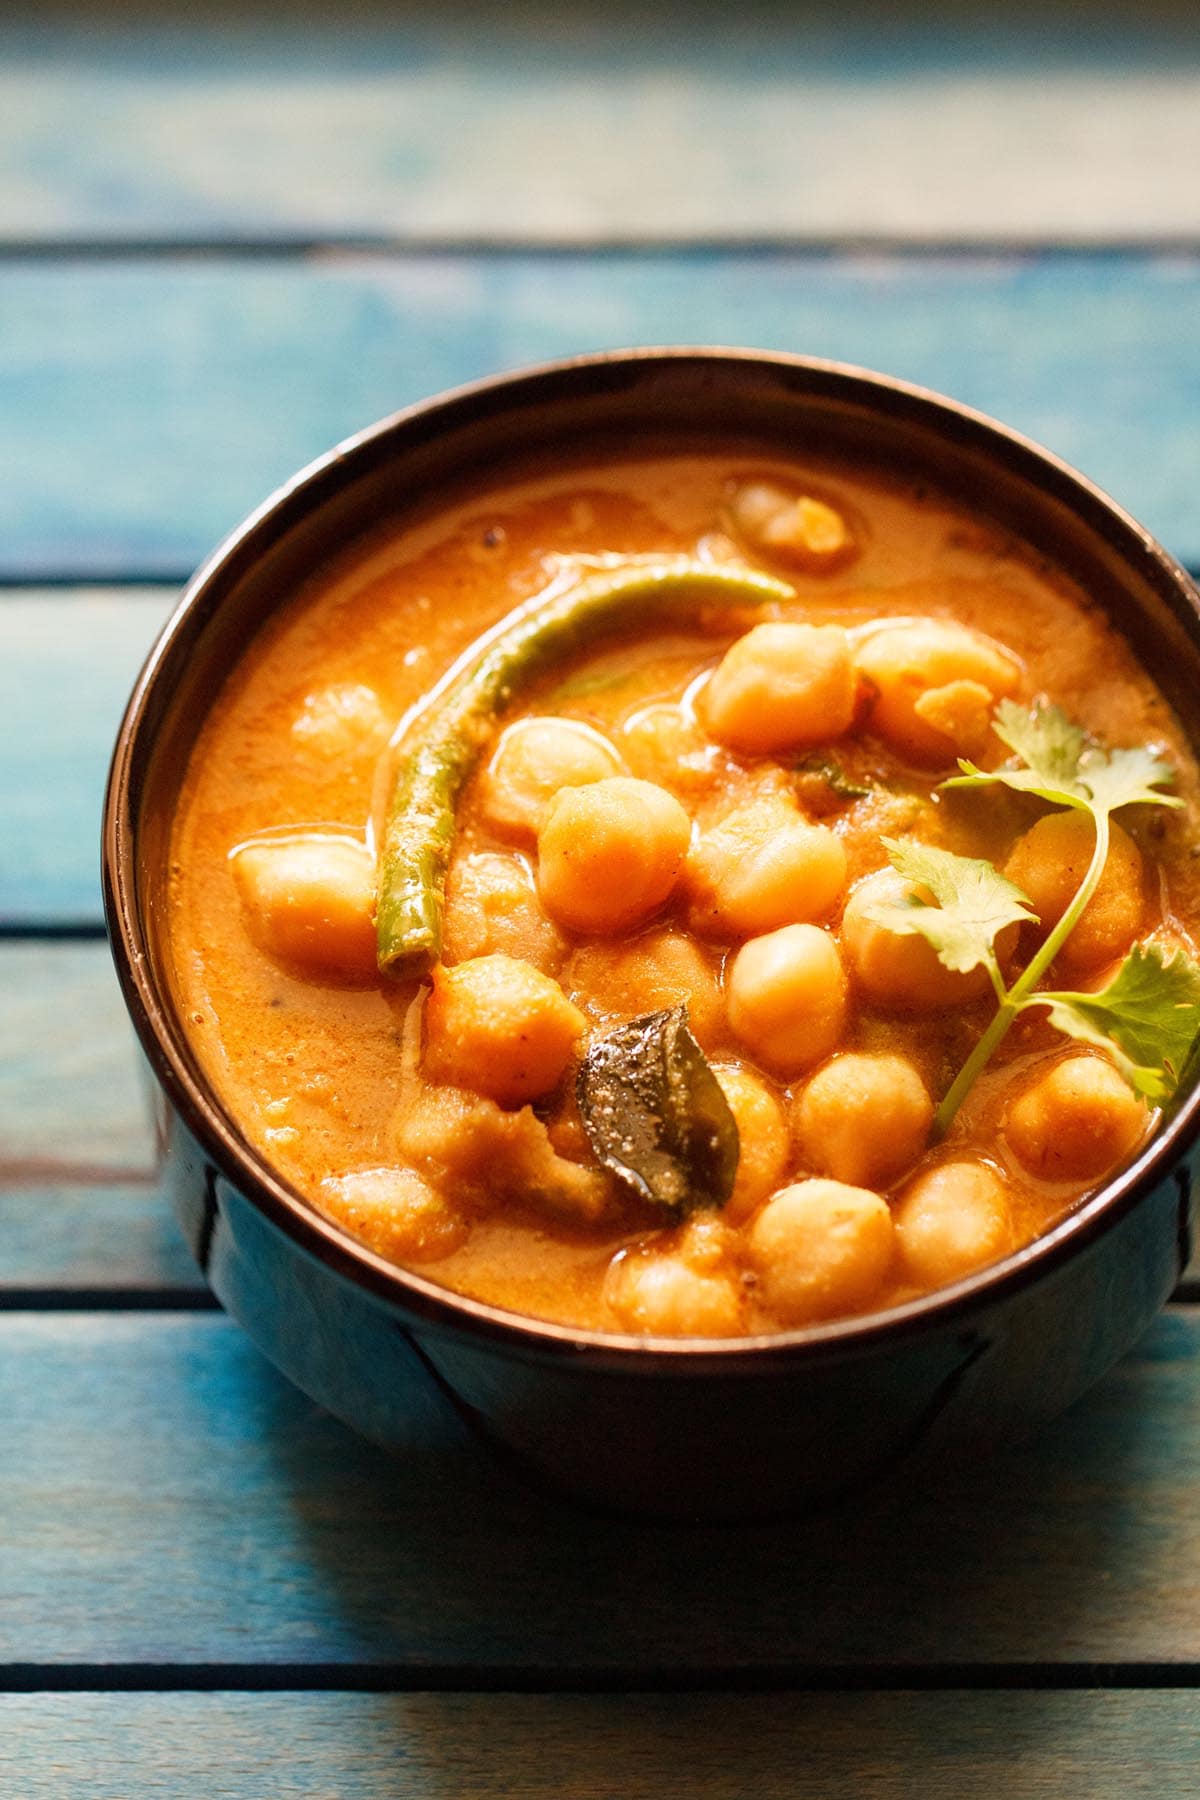 chickpea curry with a coriander sprig on top, in a black bowl on a blue wooden tray.